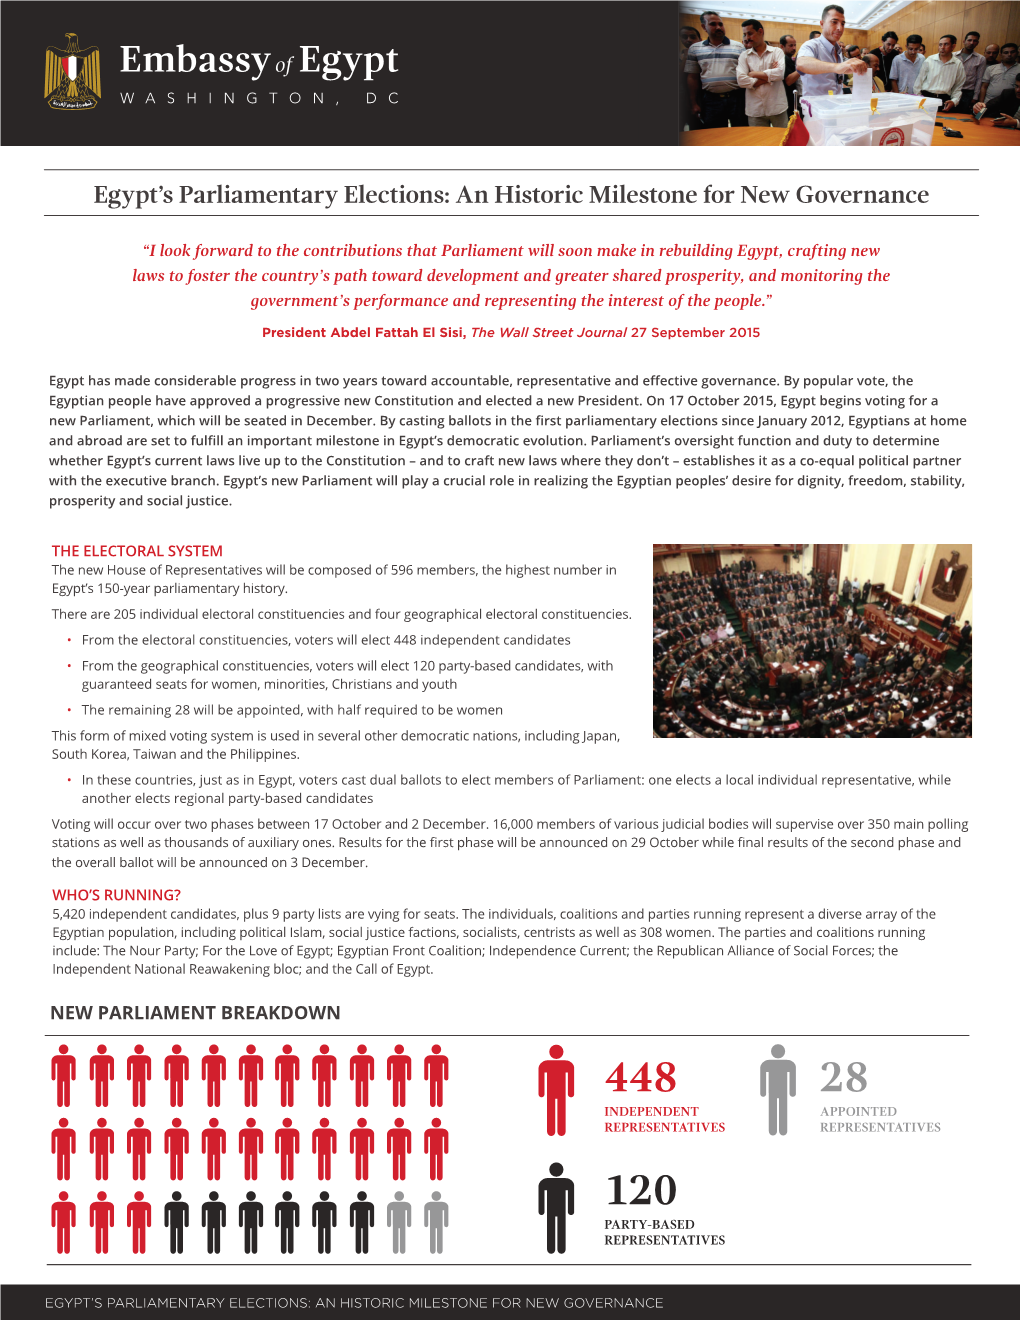 Egypt's Parliamentary Elections: an Historic Milestone for New